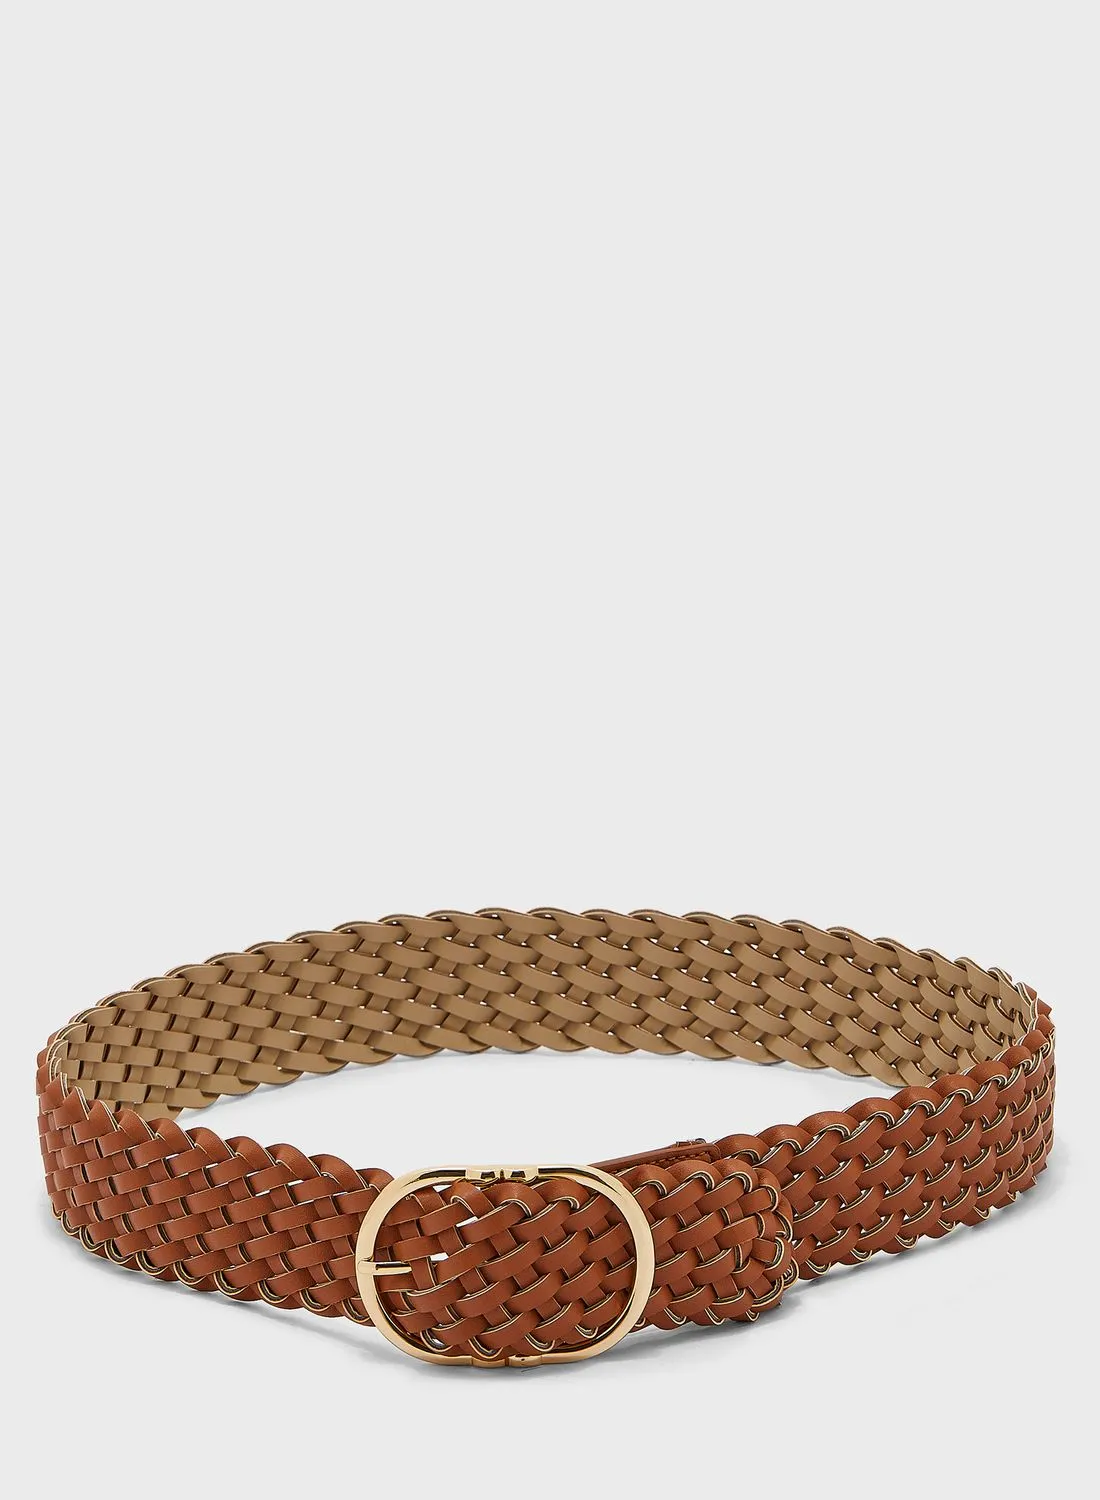 ONLY Casual Allocated Hole Belt